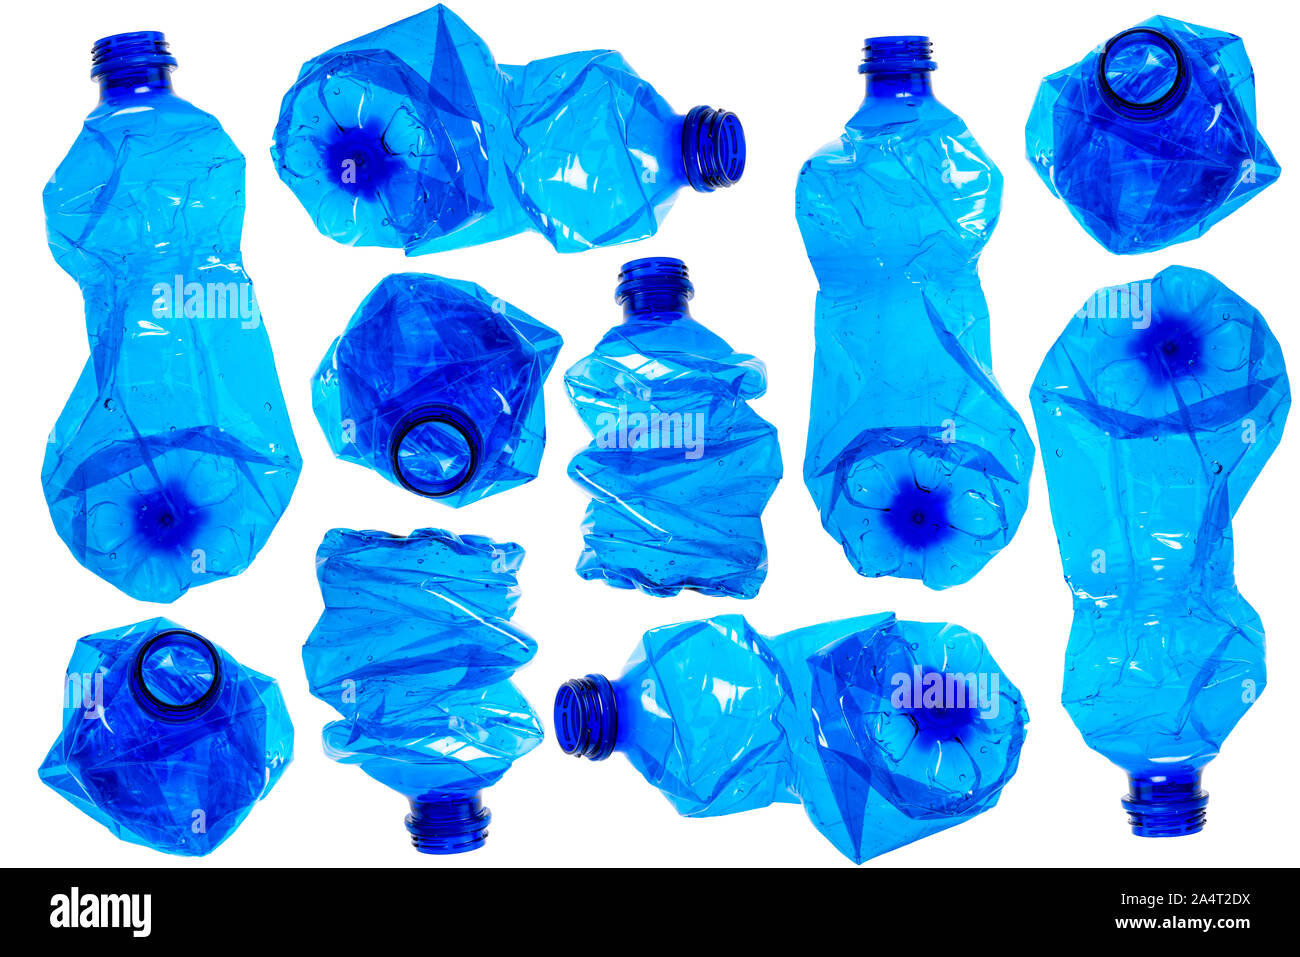 Used plastic bottles background. Recyclable waste concept. Stock Photo